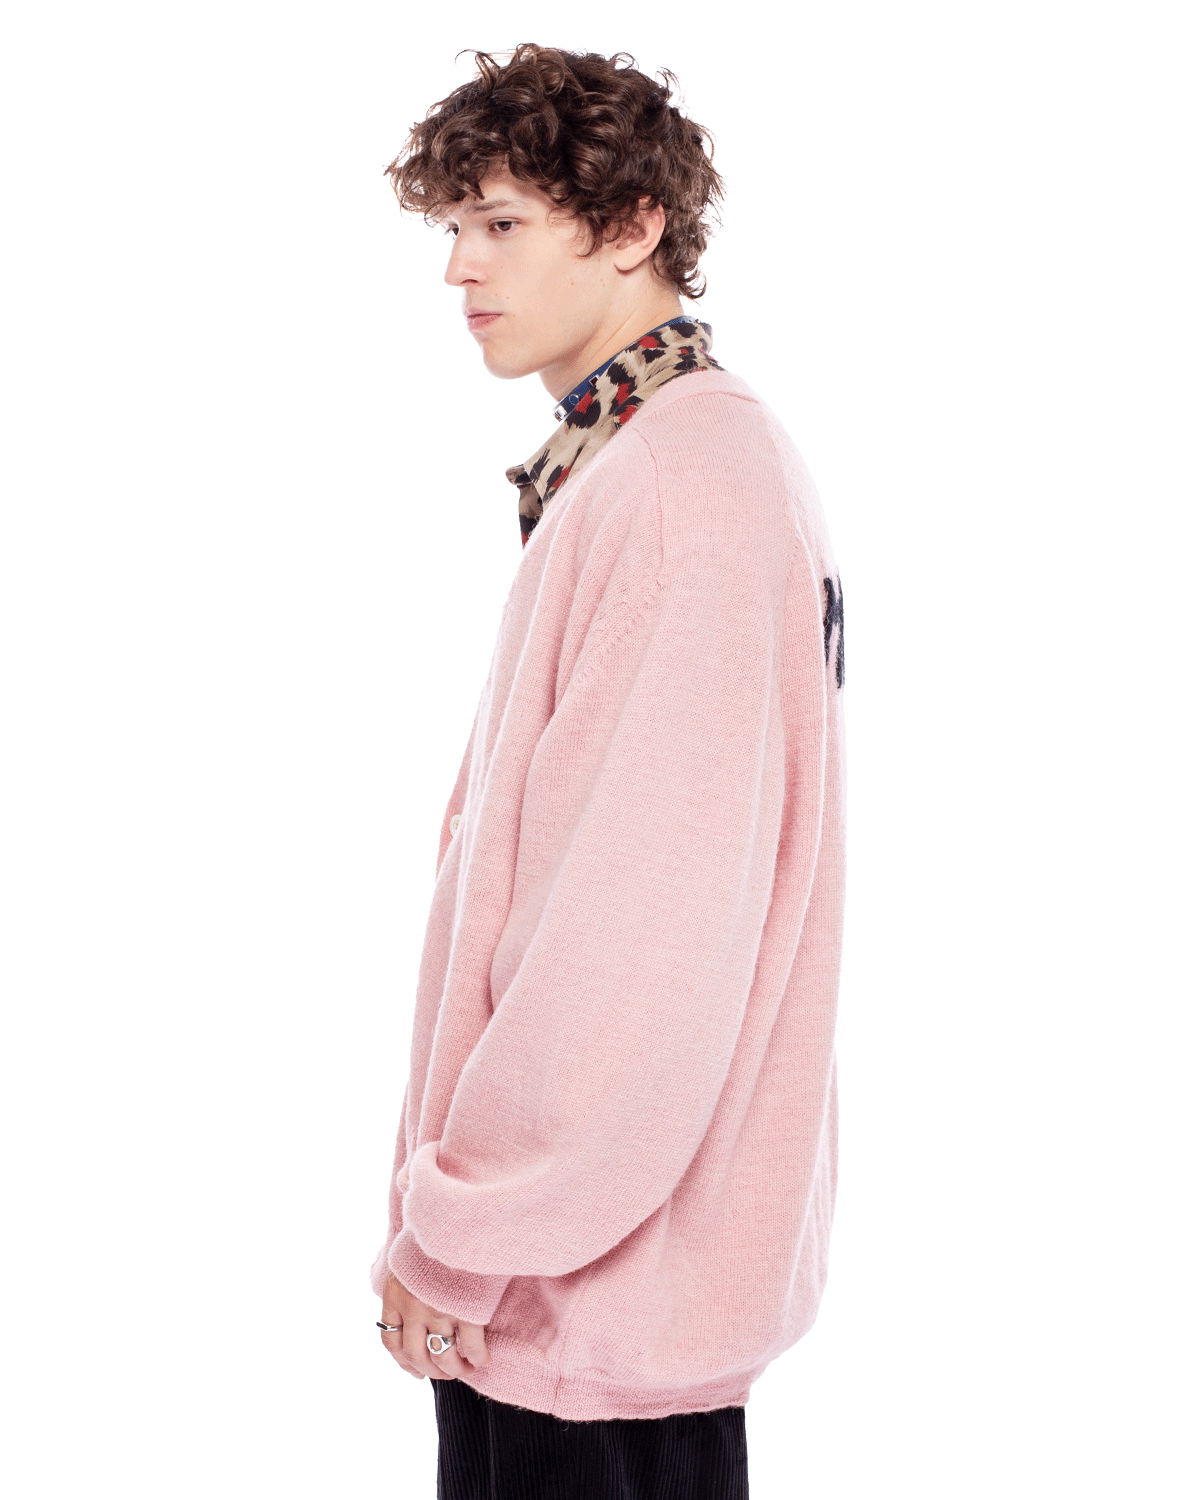 A Huge Magliano Cardigan Light Pink